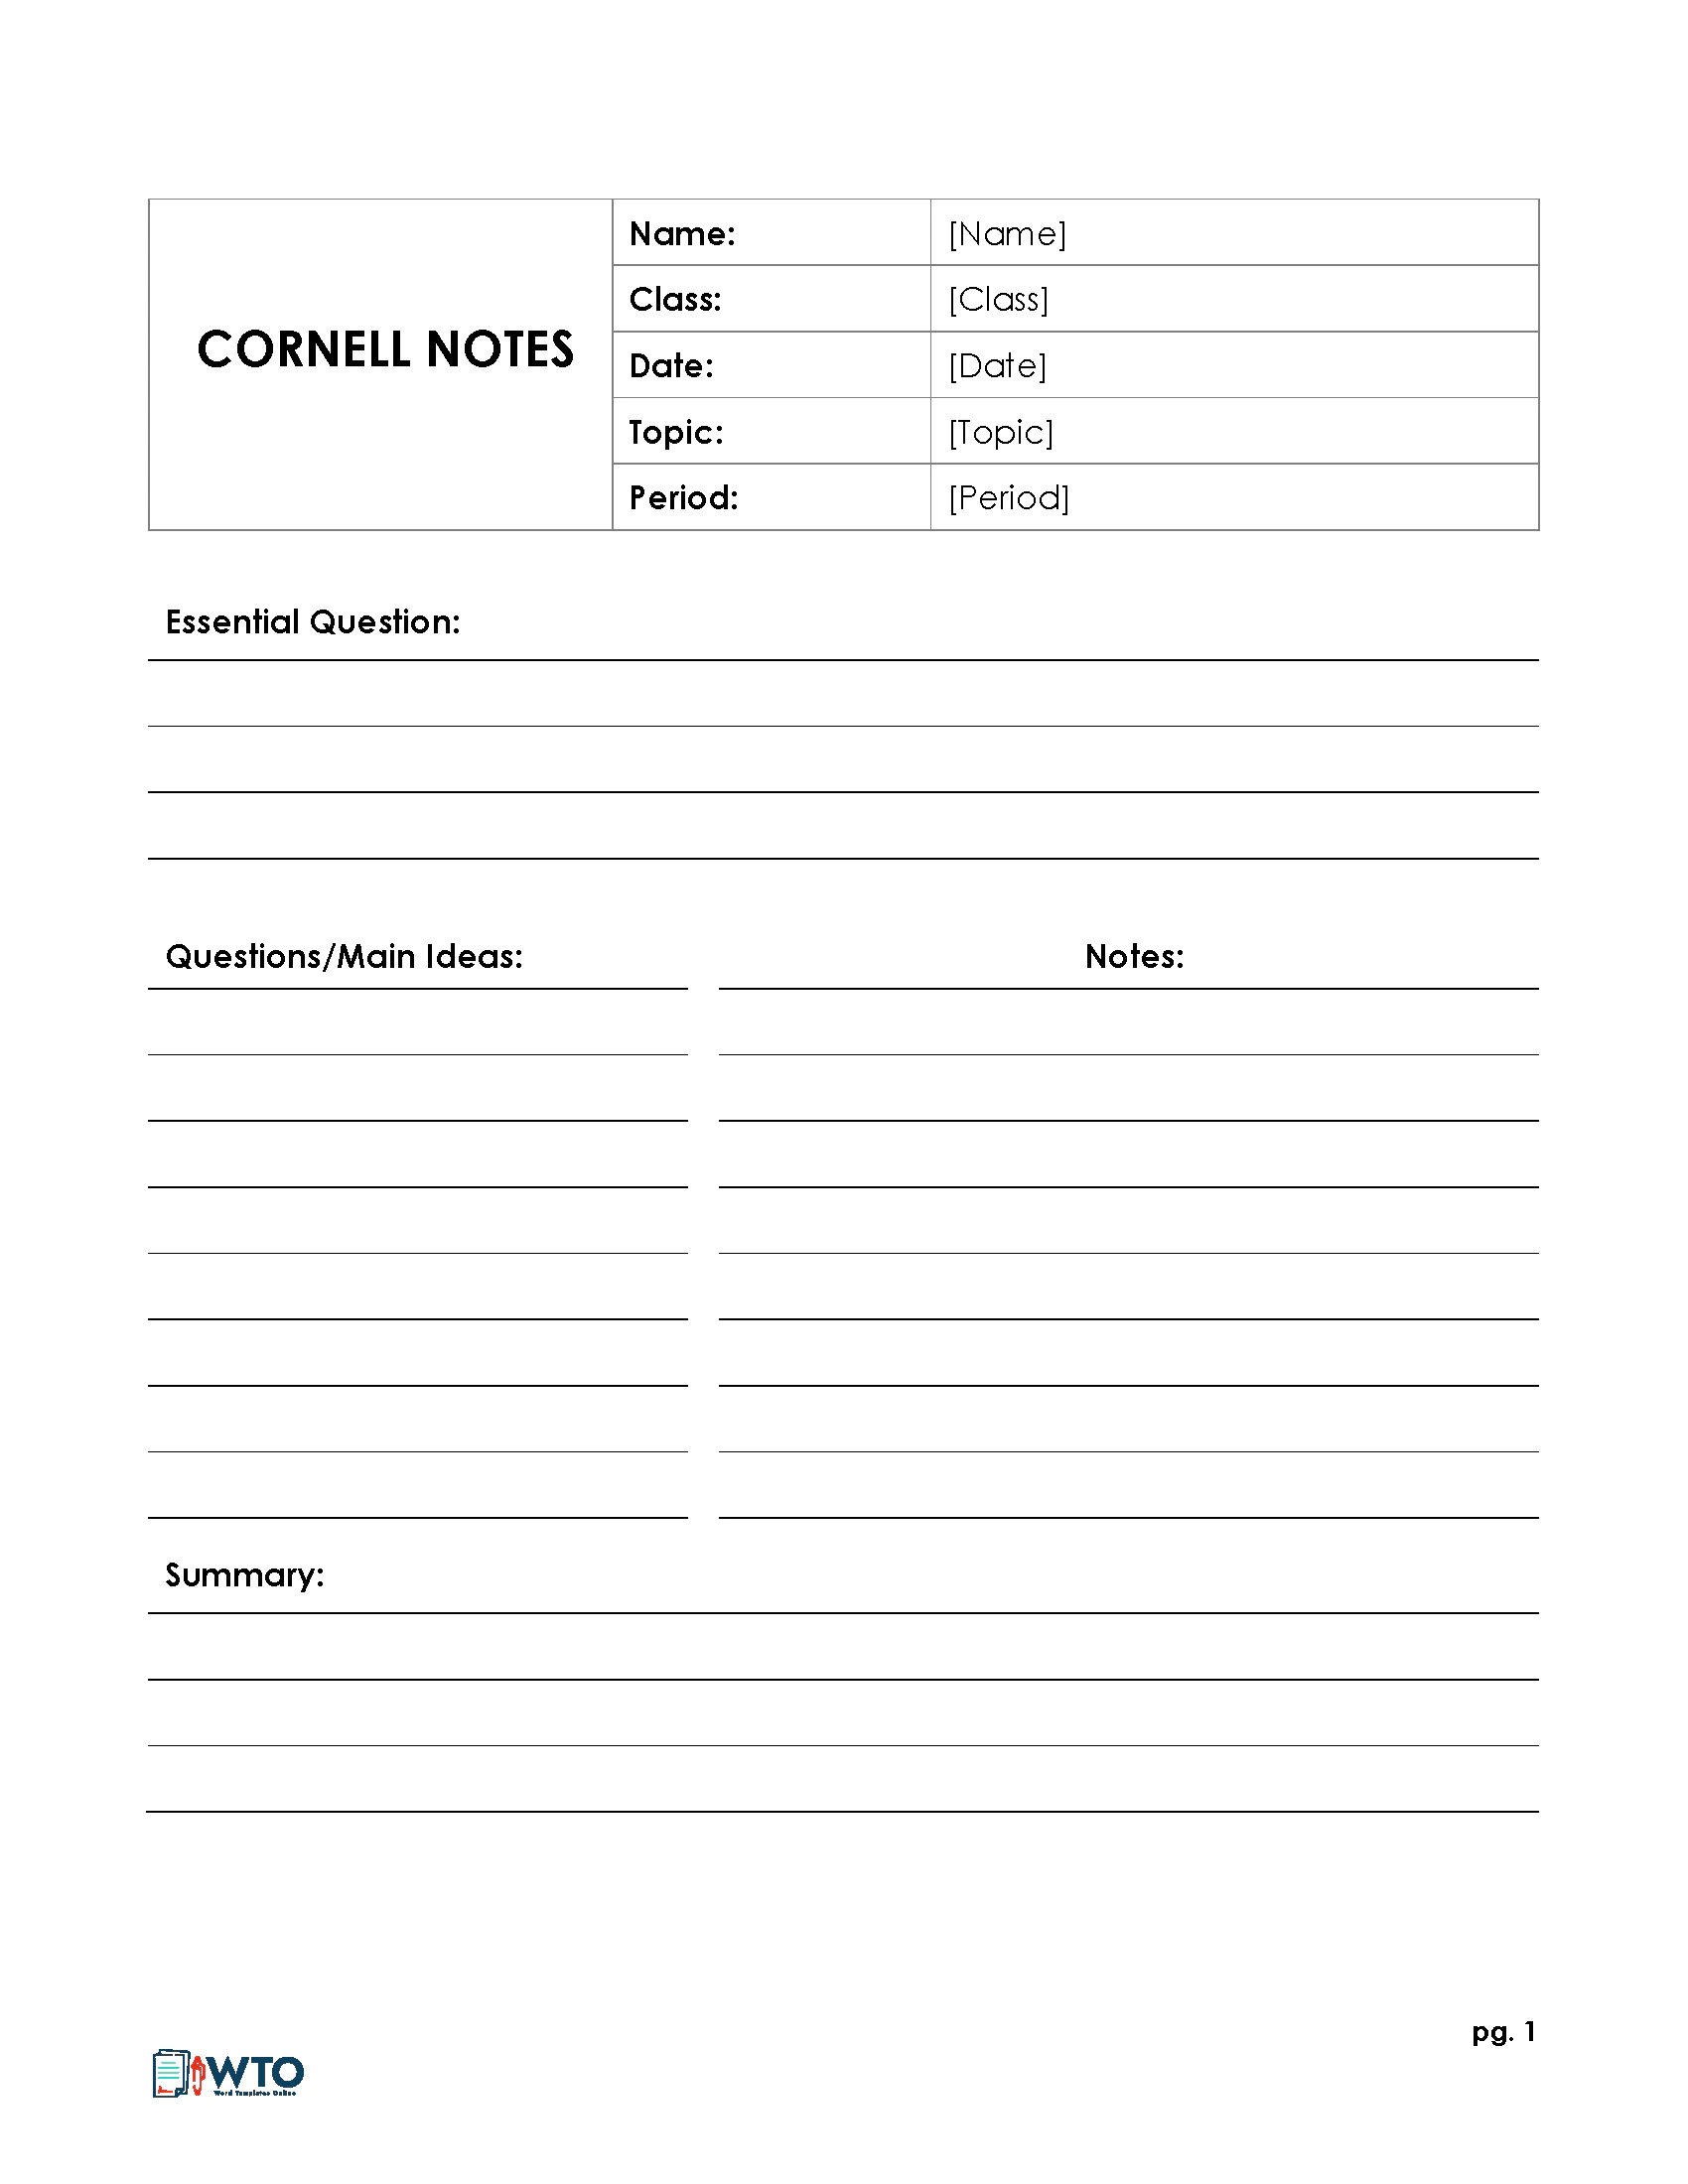 23 Free Cornell Note Templates (Cornell Note Taking Explained) Throughout Cornell Notes Template Word Document